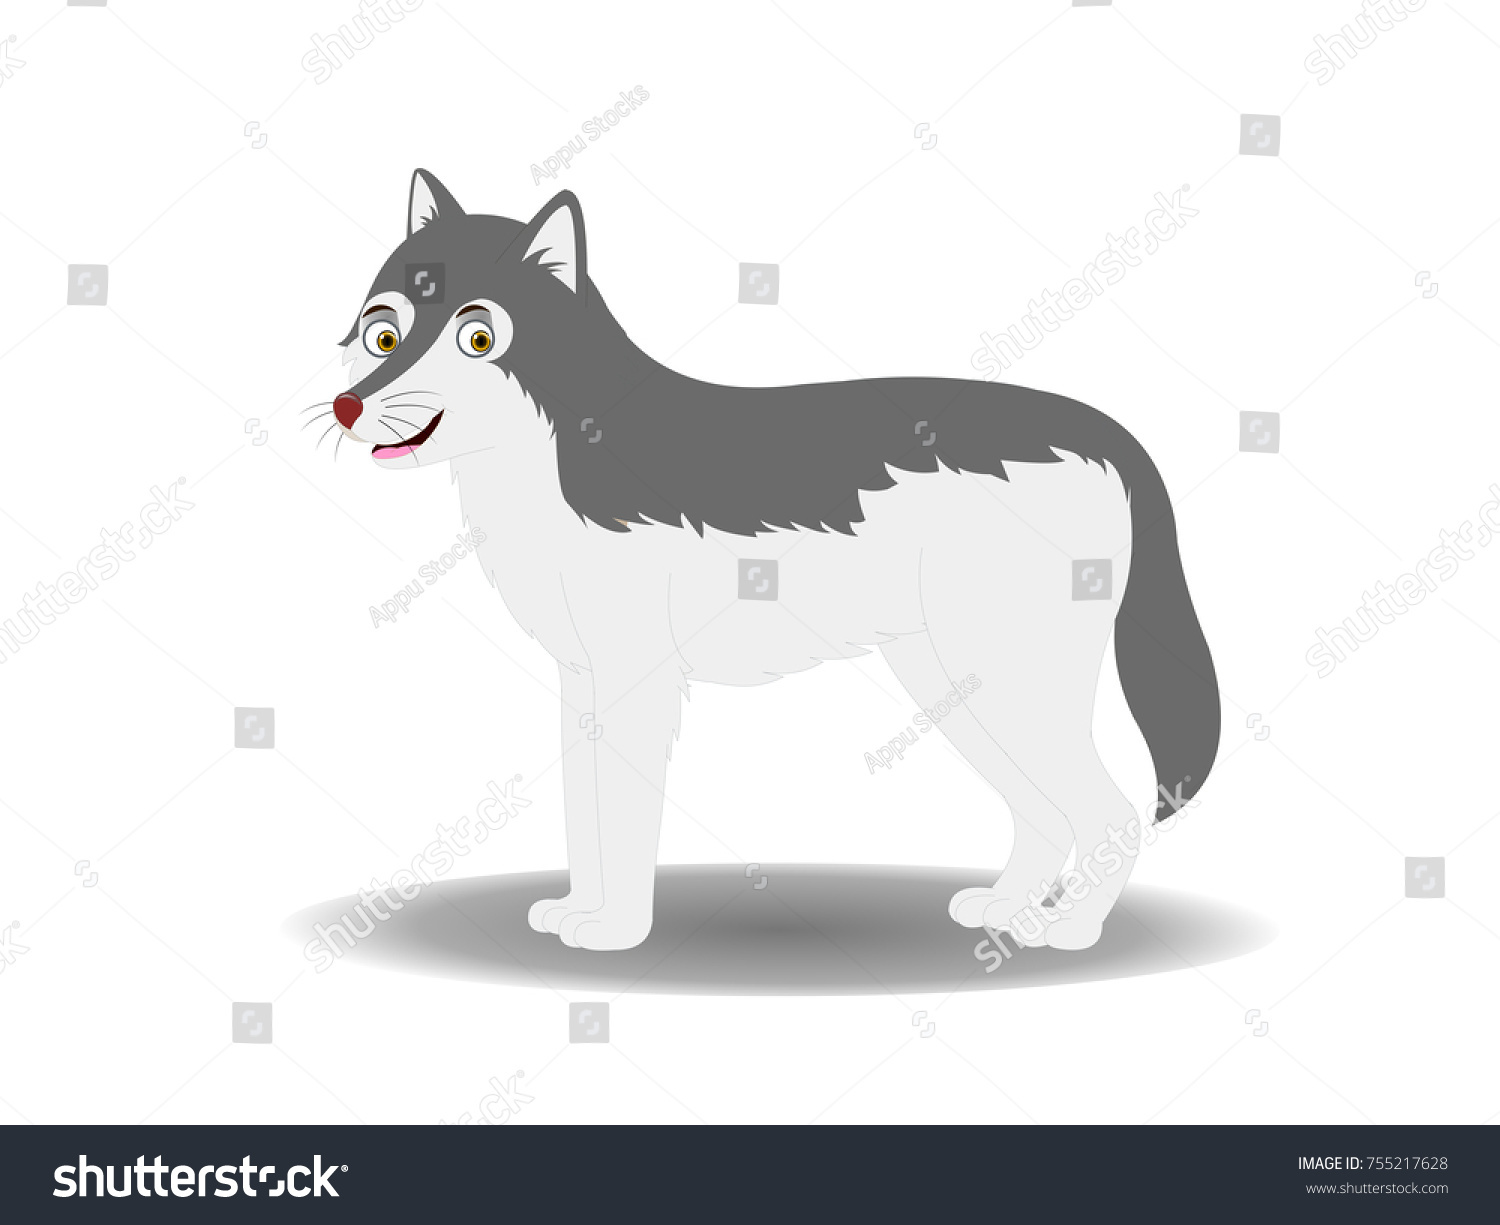 Wolf Expressions Cartoon Vector Image Stock Vector (Royalty Free ...